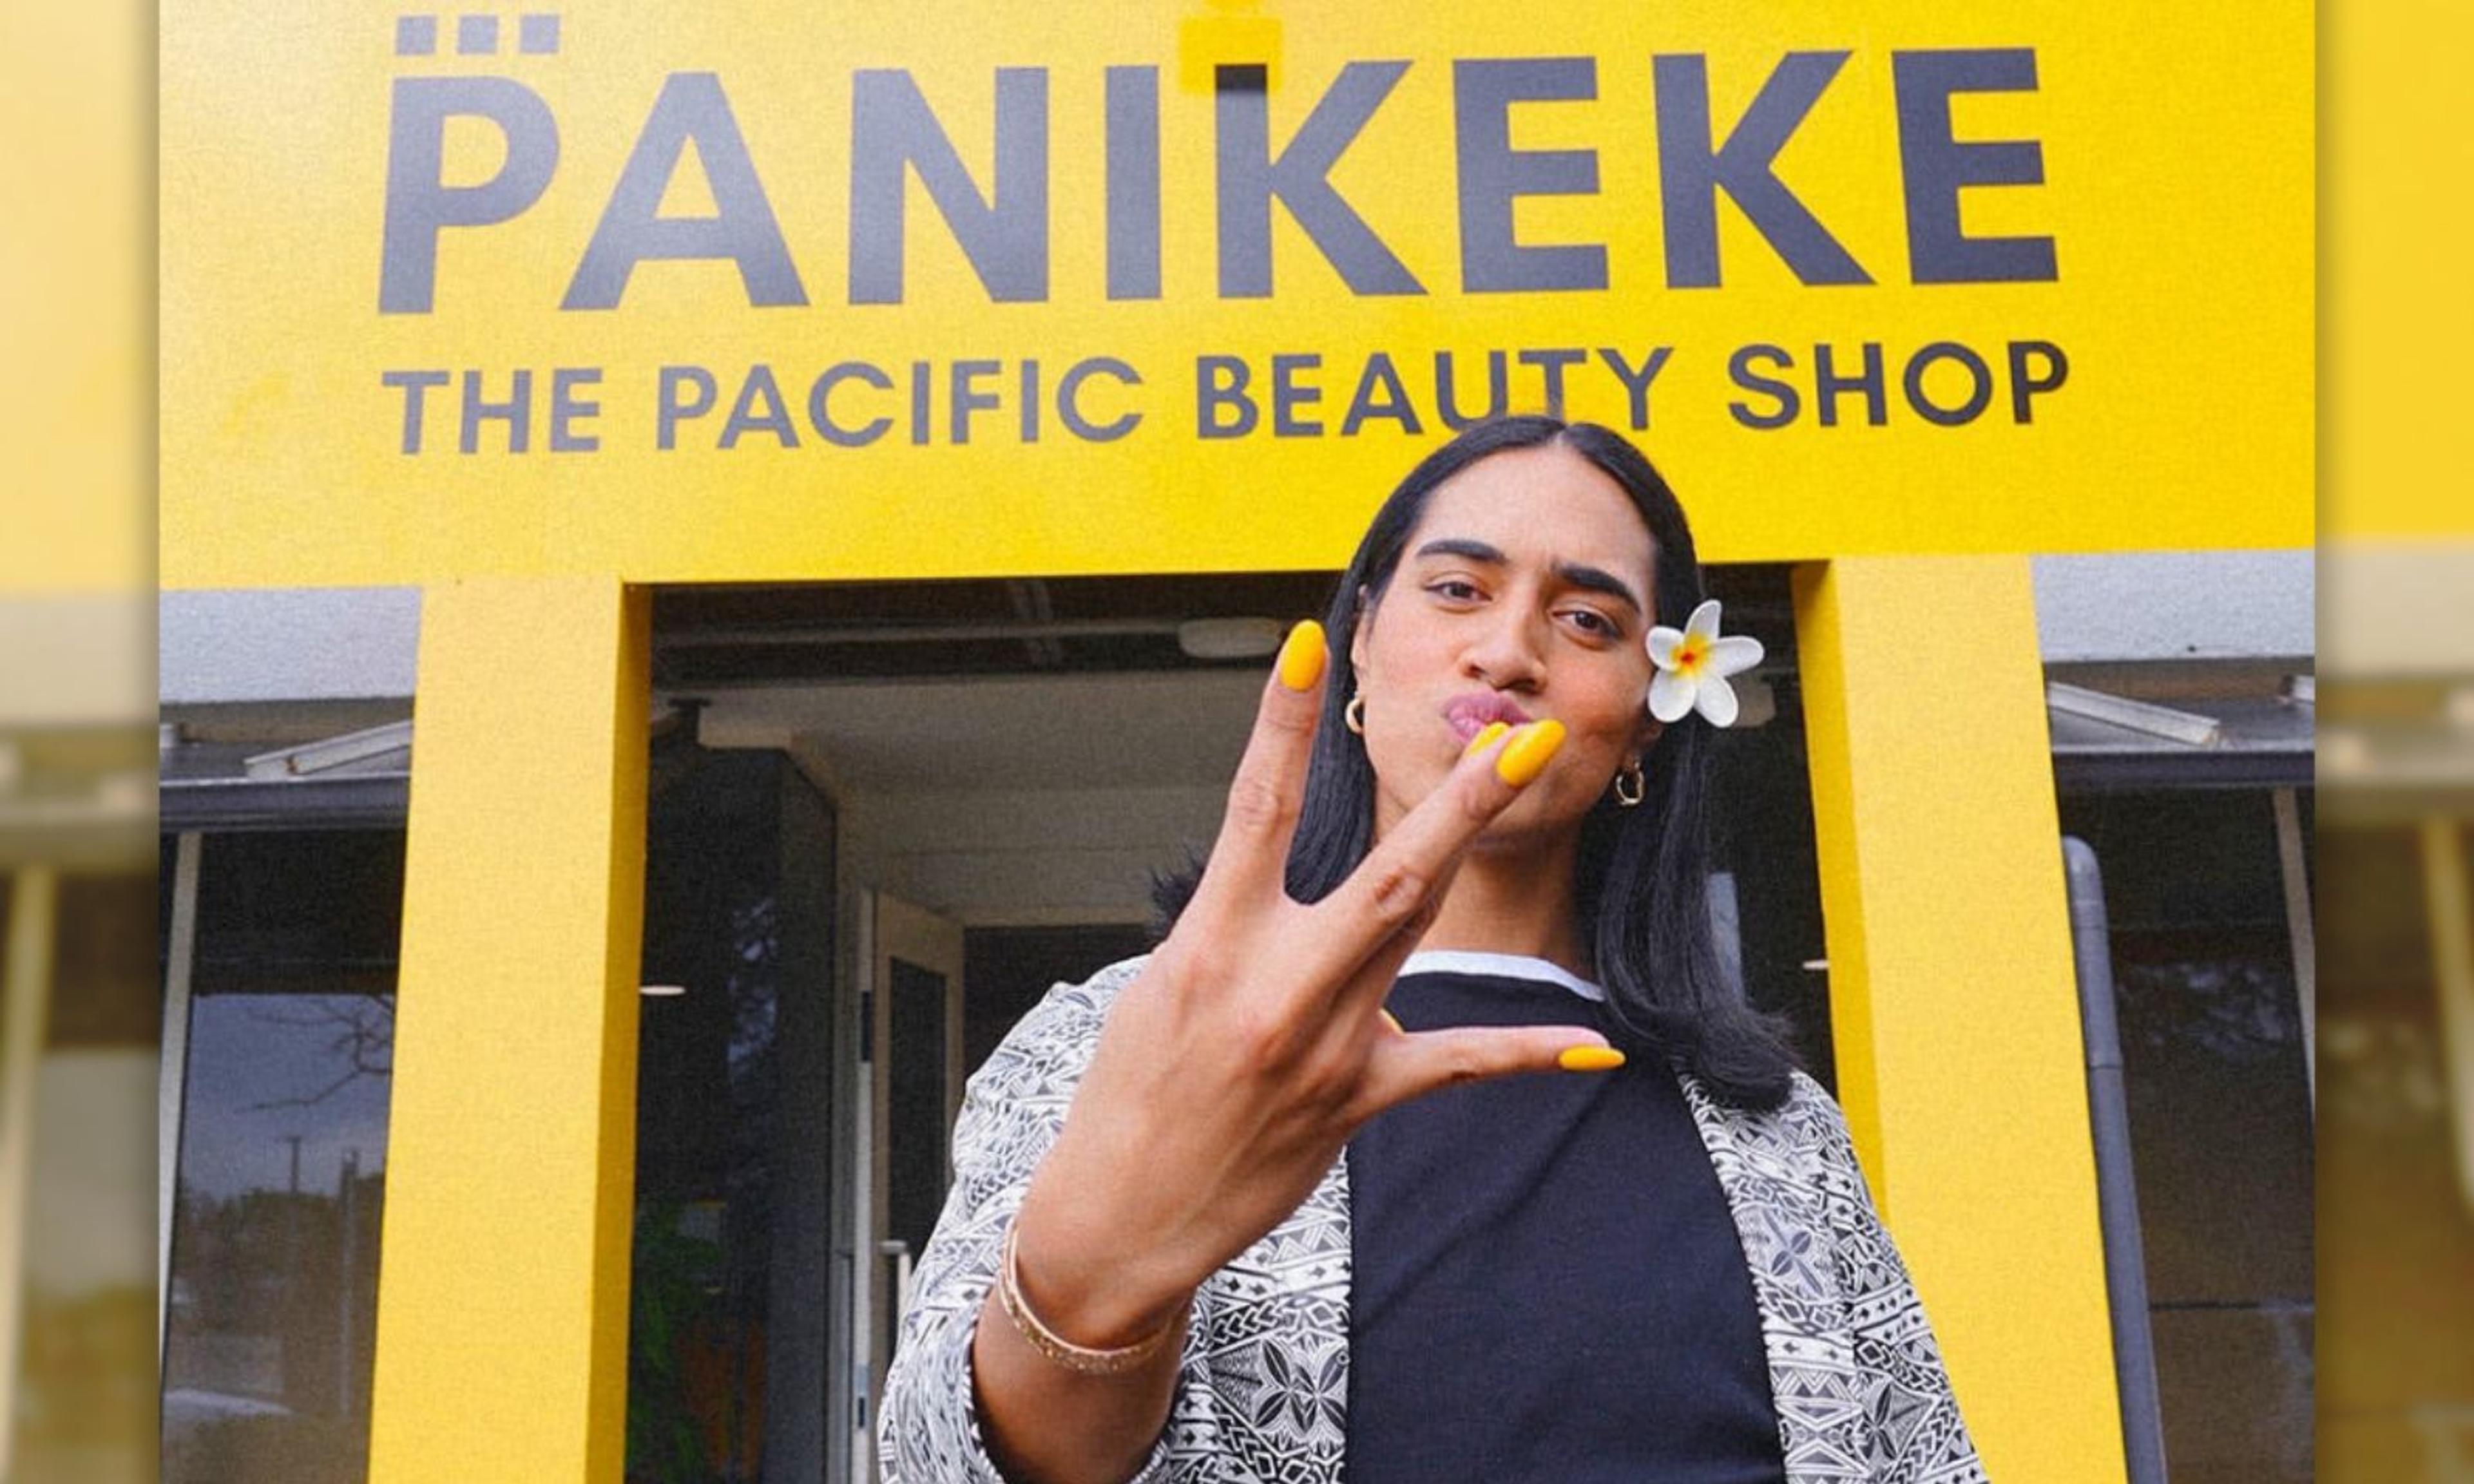 Panikeke founder and CEO Kiteli Toma takes the Pacific beauty shop to New Lynn, West Auckland.